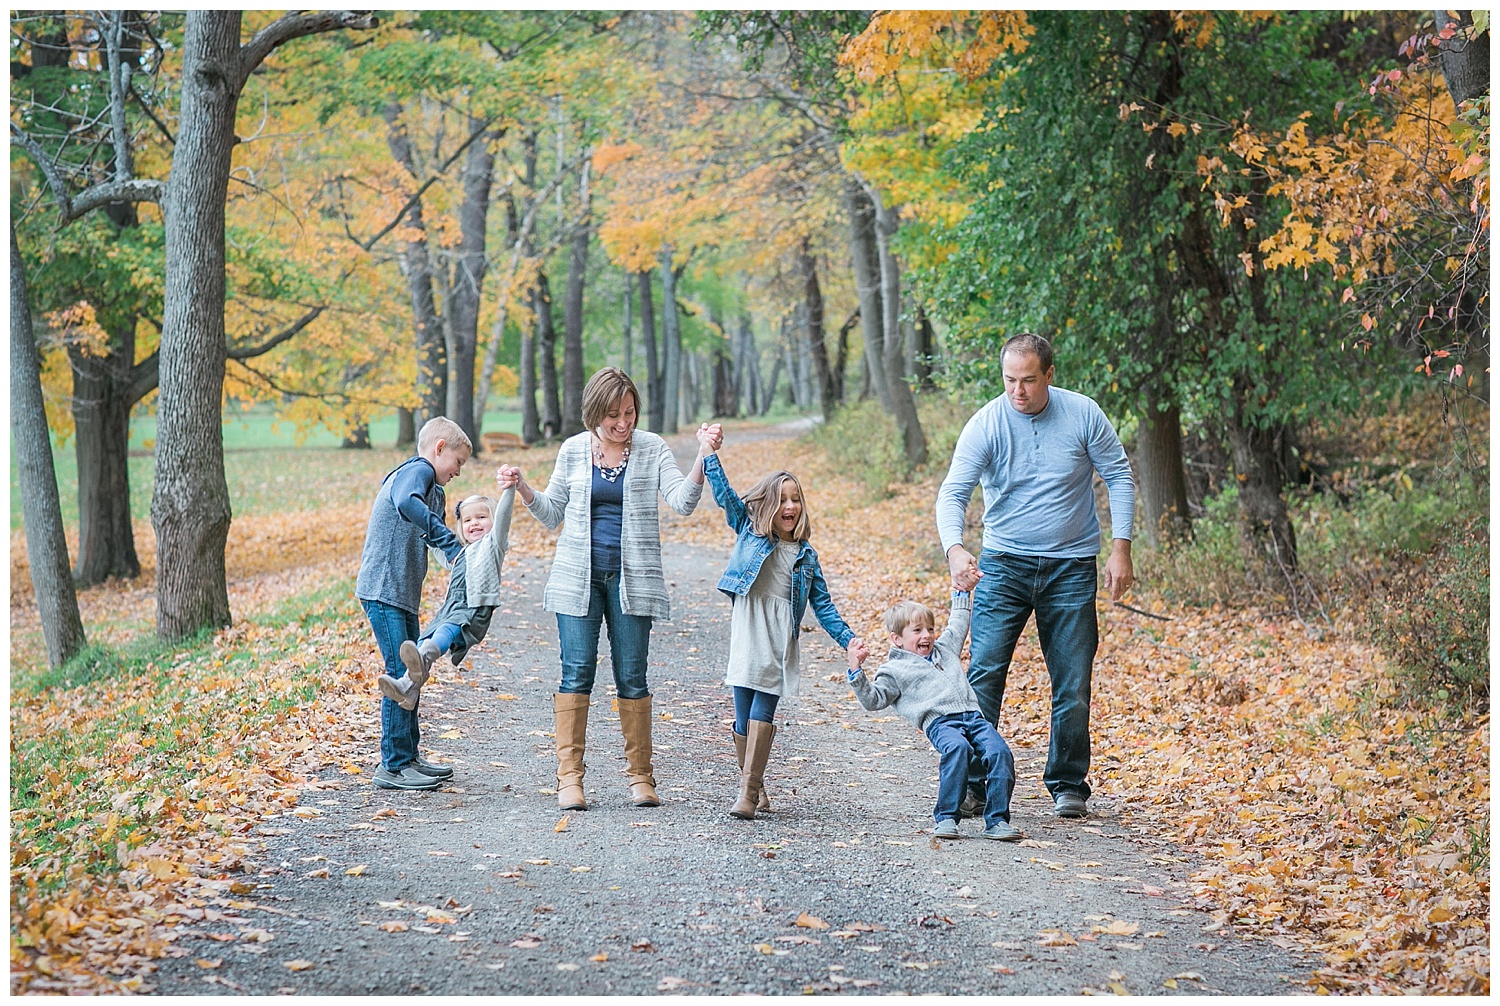 The Schurr family session at Letchworth state park - Whimsy roots photography 35.jpg